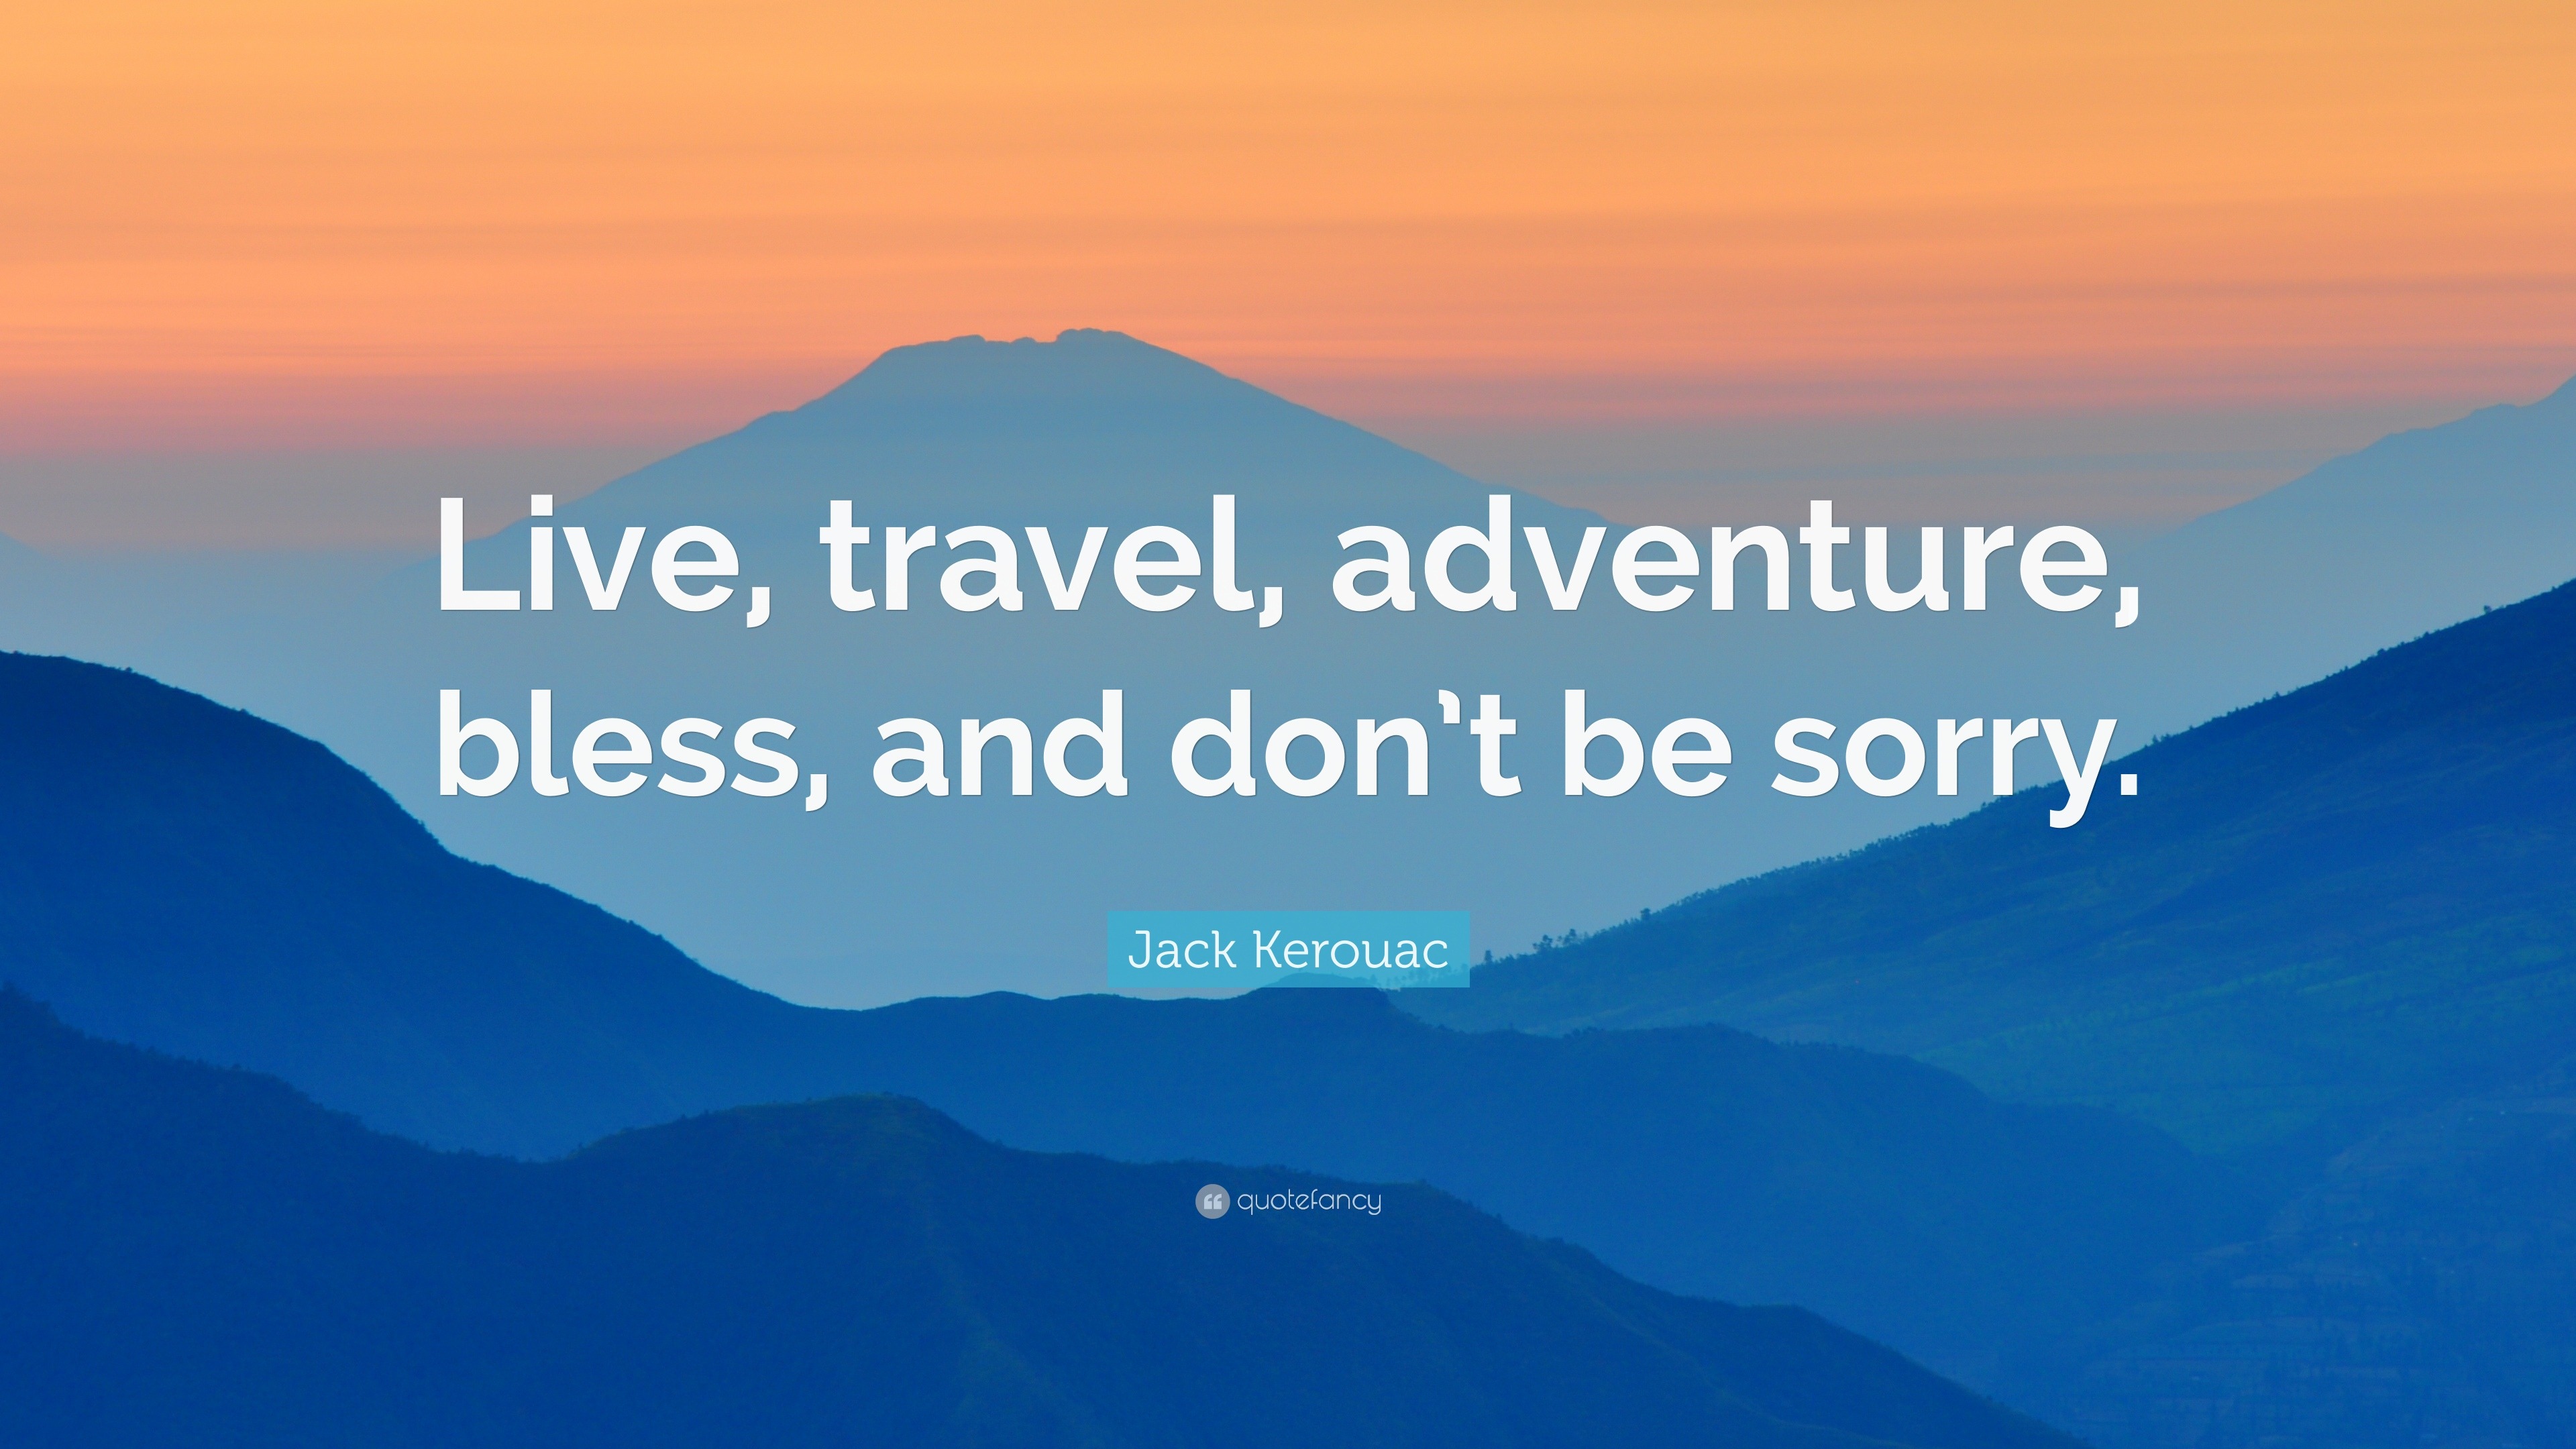 kerouac quotes about travel